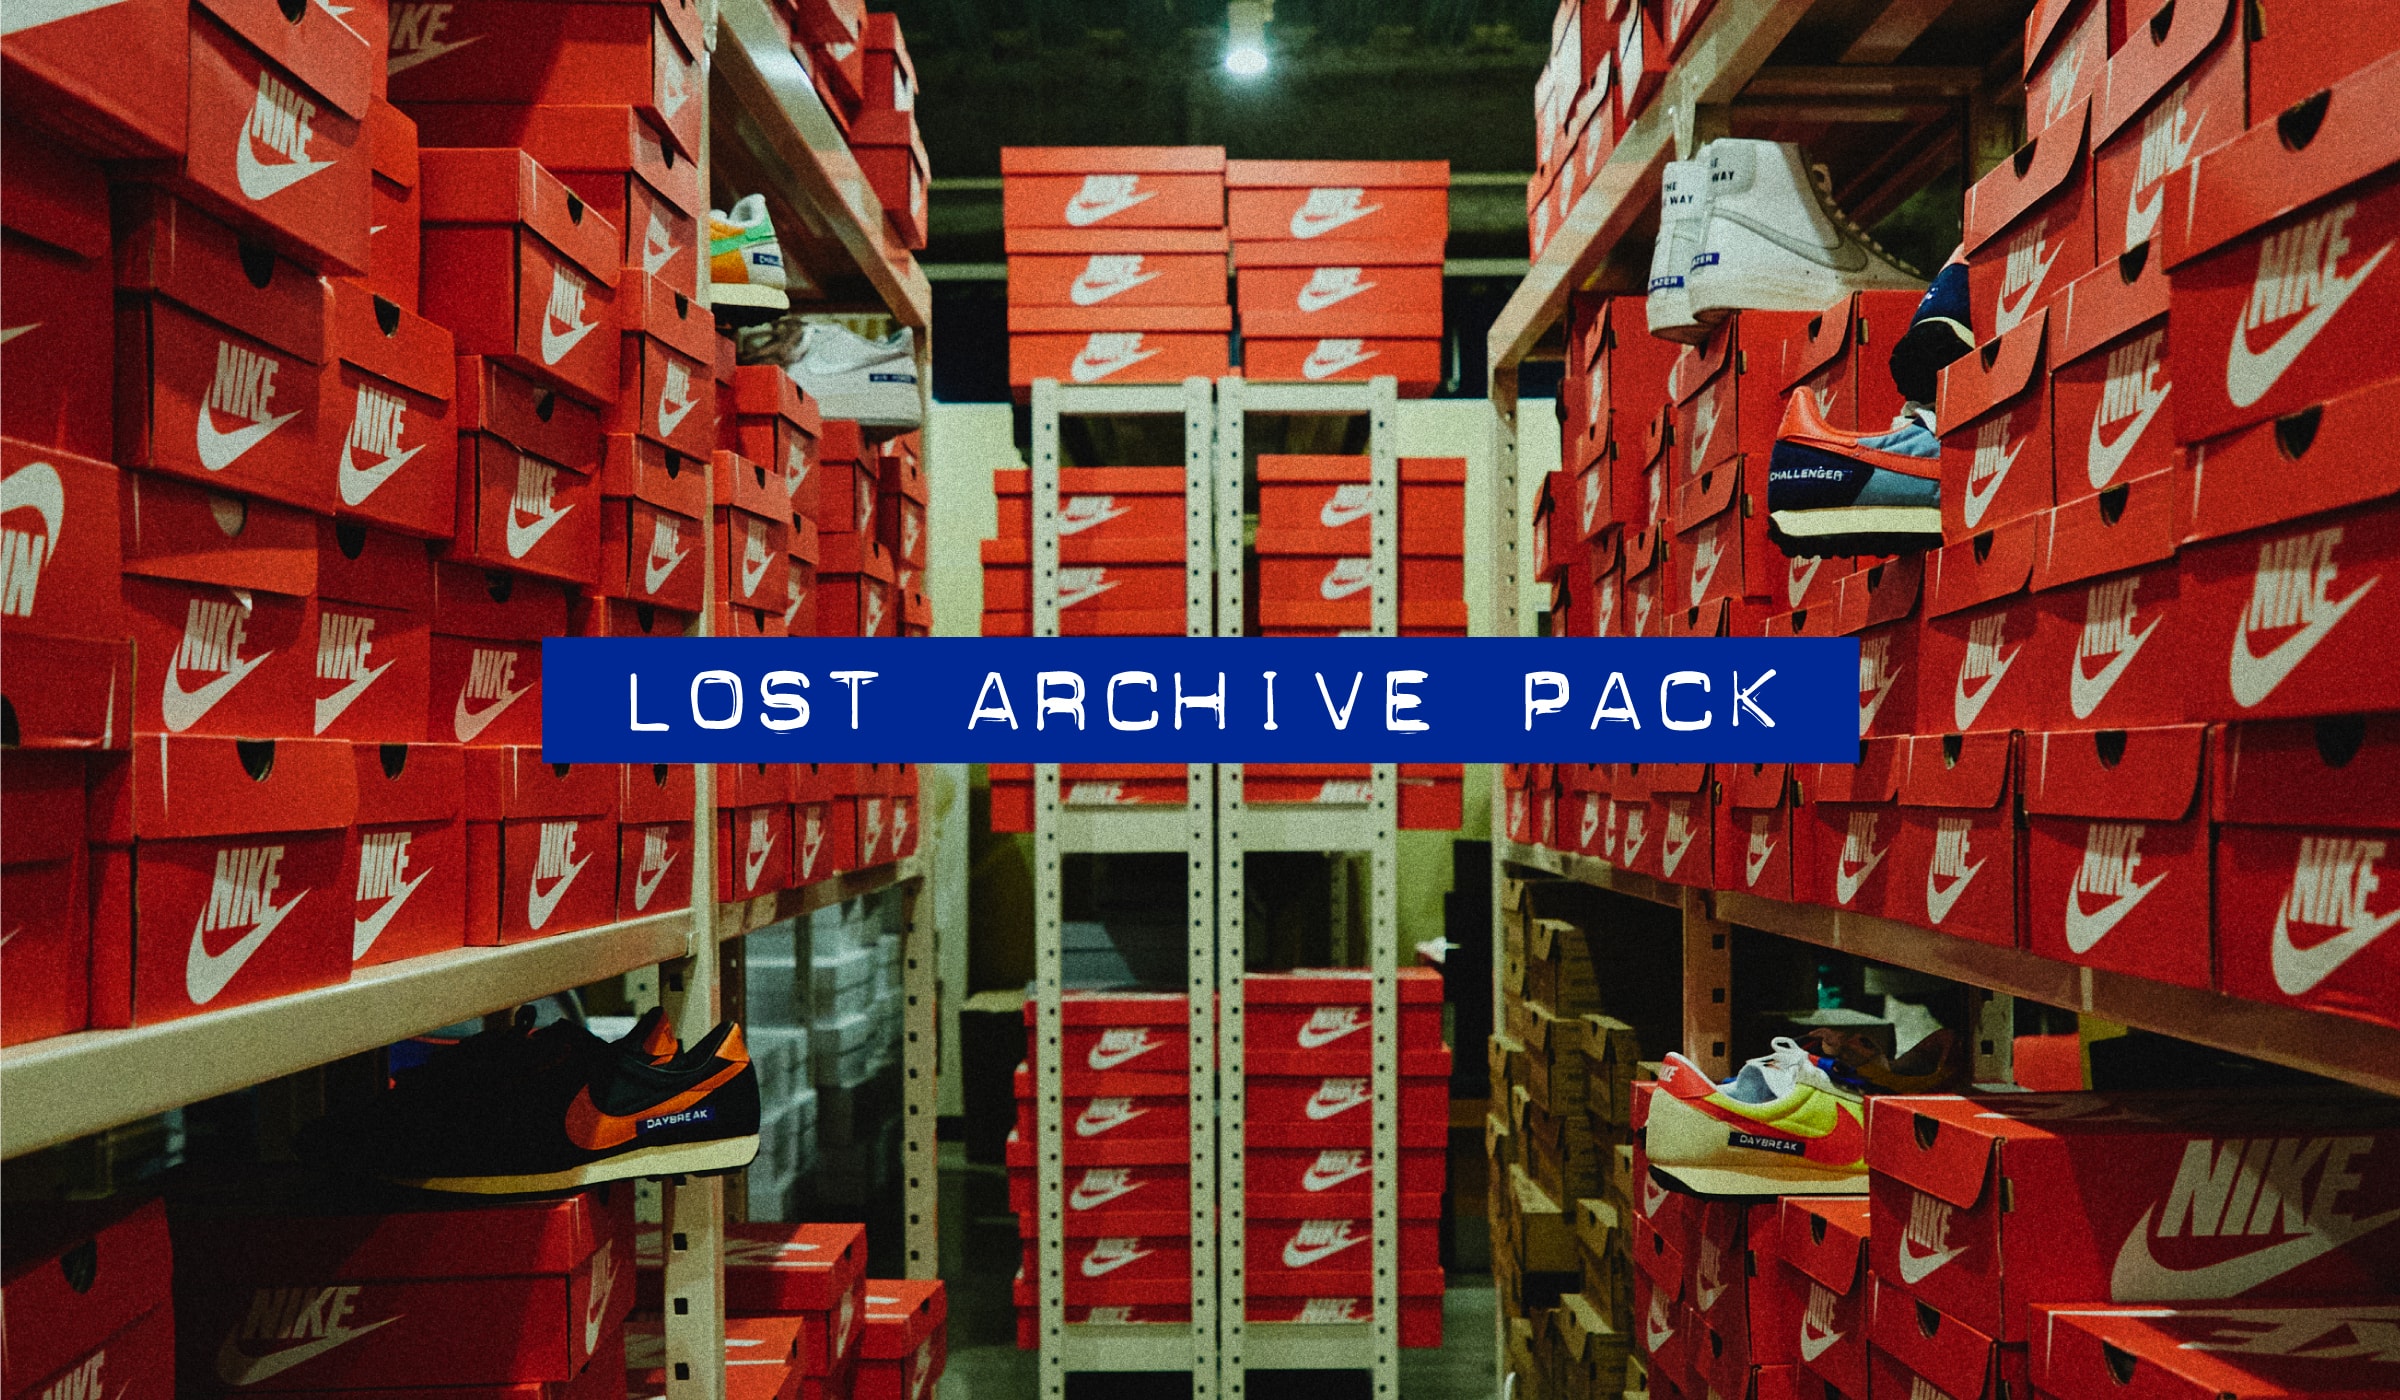 NIKE LOST ARCHIVE PACK